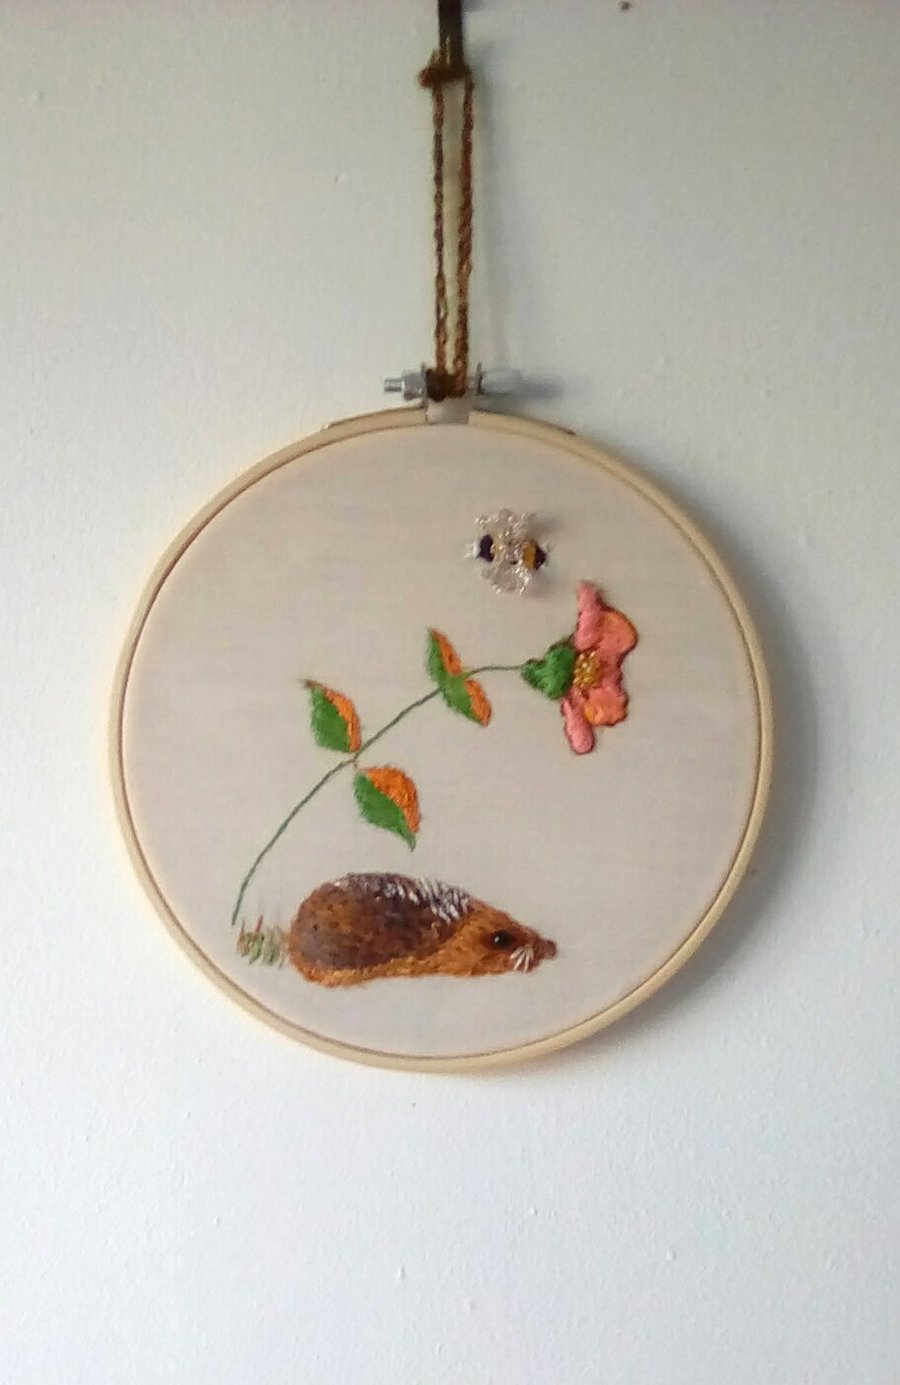 Embroidered Hedgehog, Animal Embroidery, Hand Embroidery